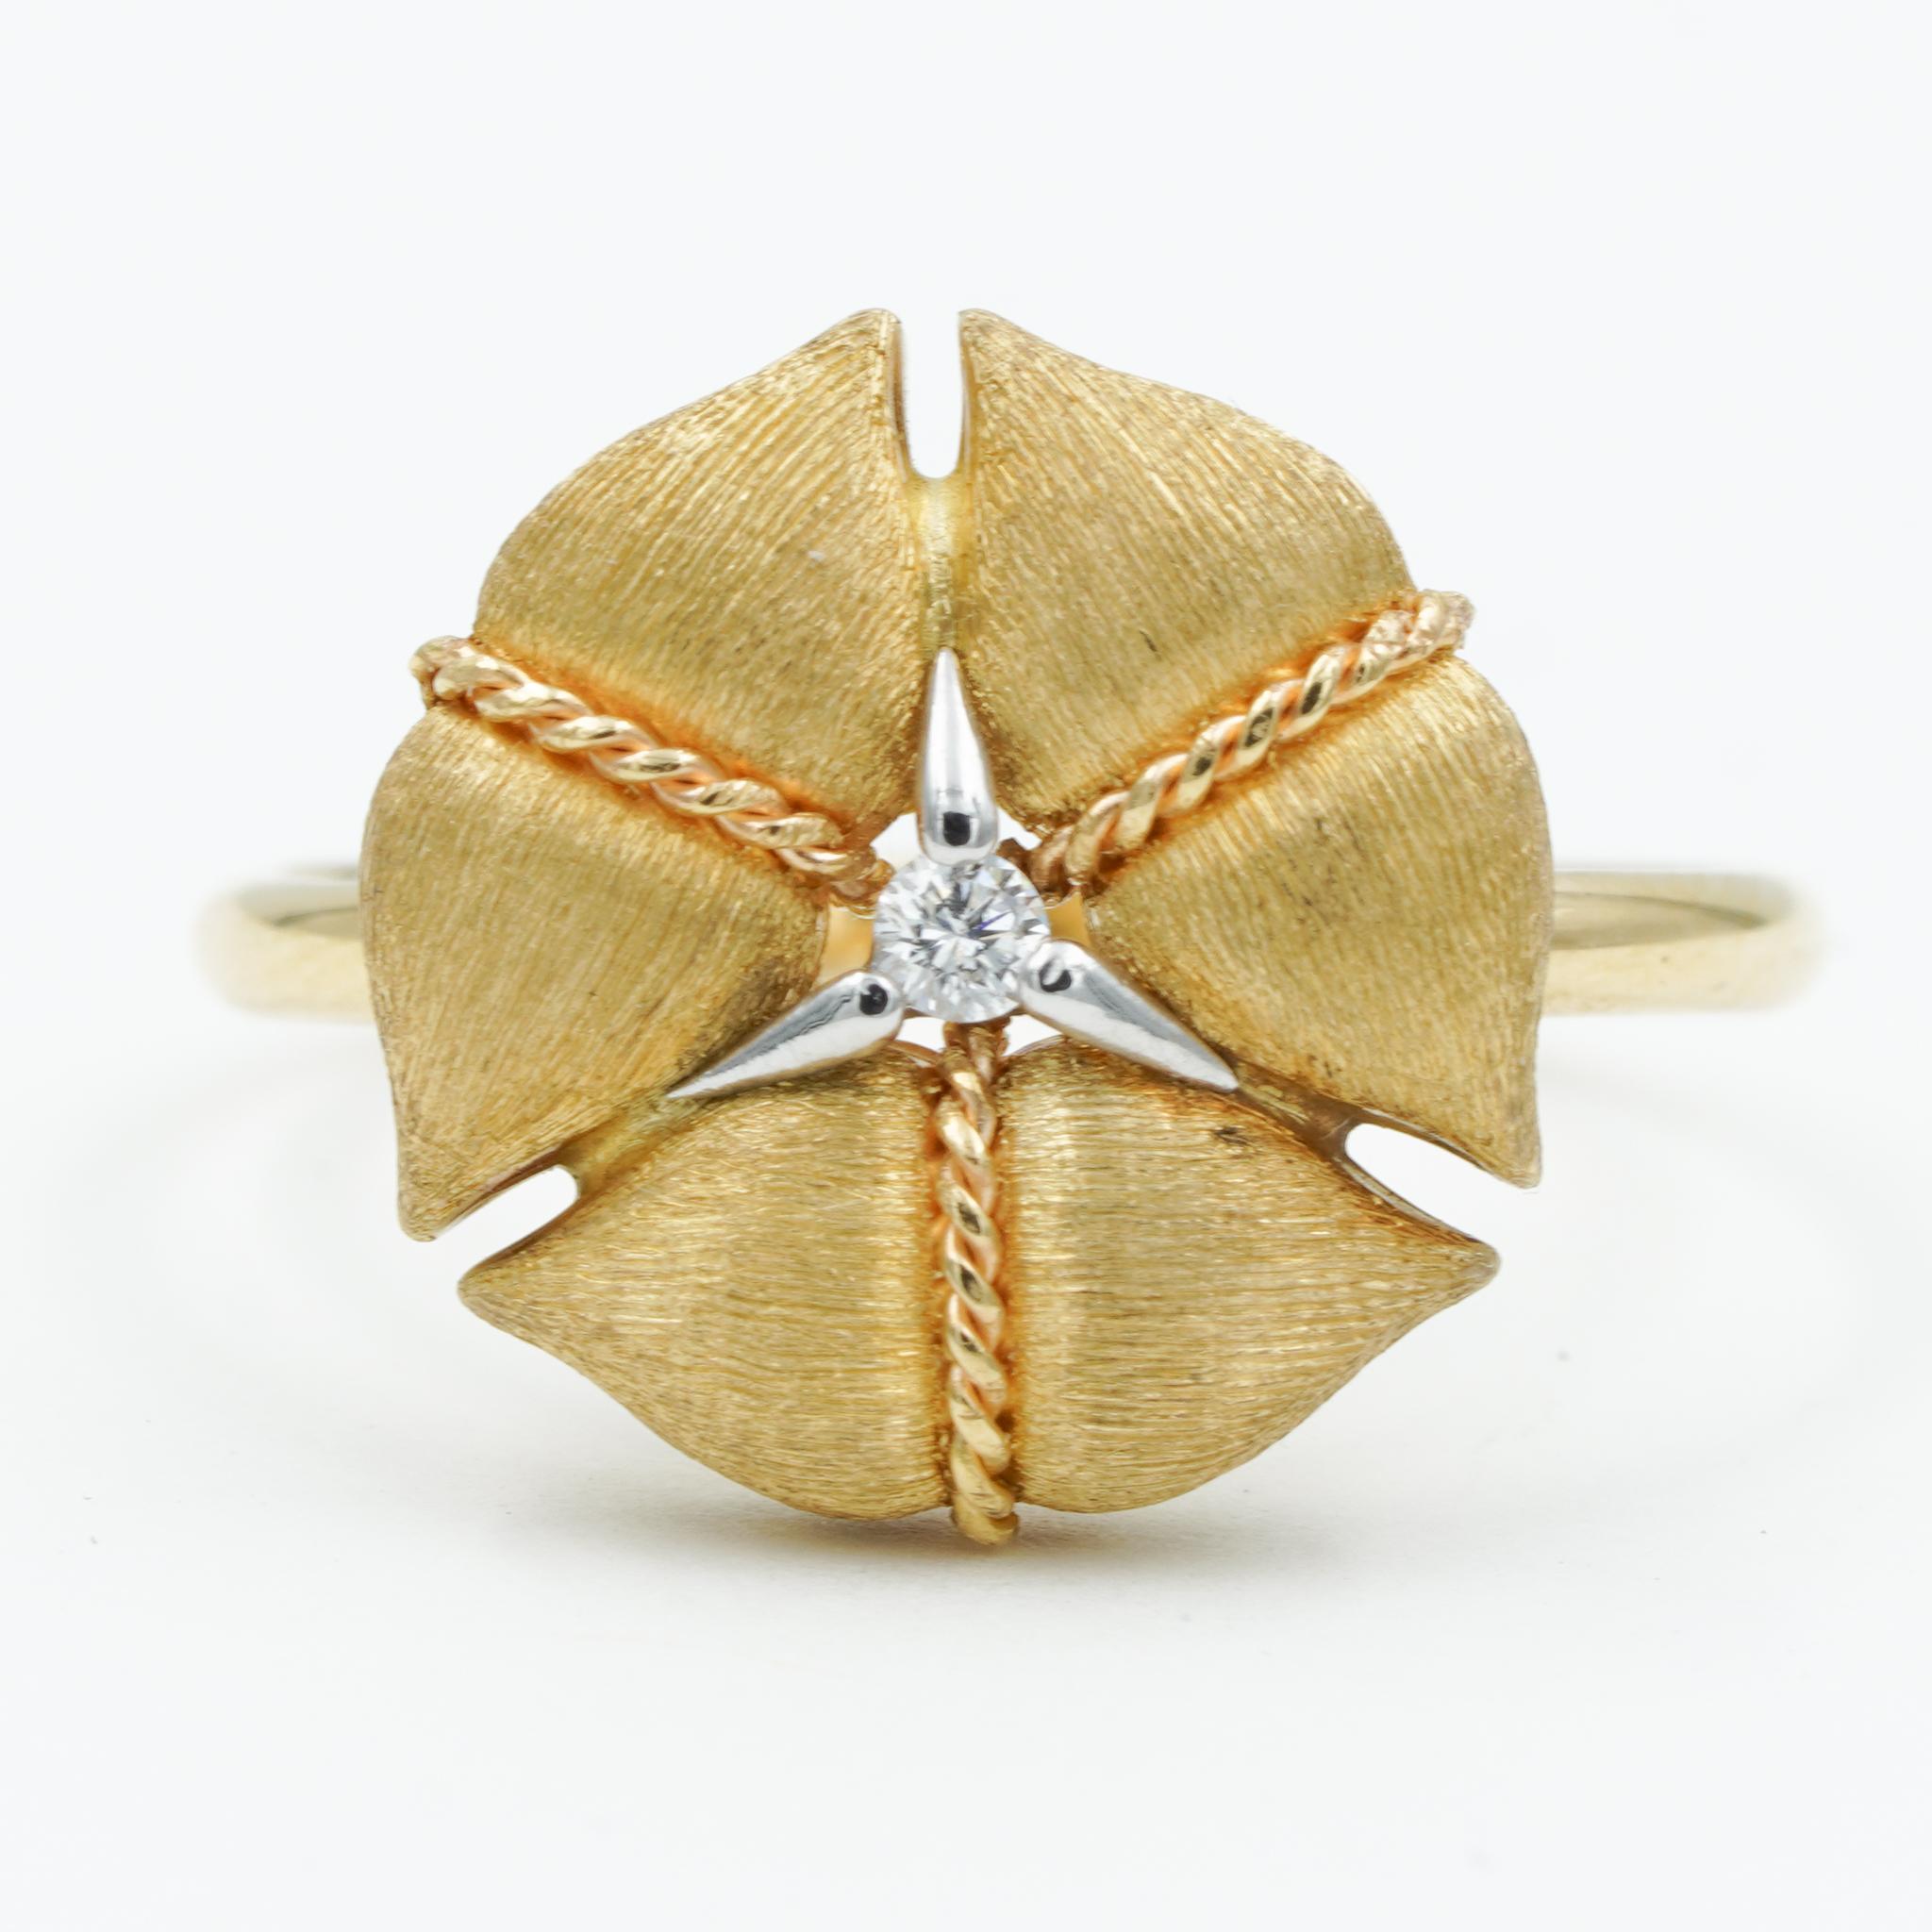 This luxurious Diamond Amarcord Ring by Nanis was handcrafted in 18k yellow gold and made beautifully with precise details. It perfectly combines an elegant and timeless style with subtle details as well as the signature brushed finish. The ring